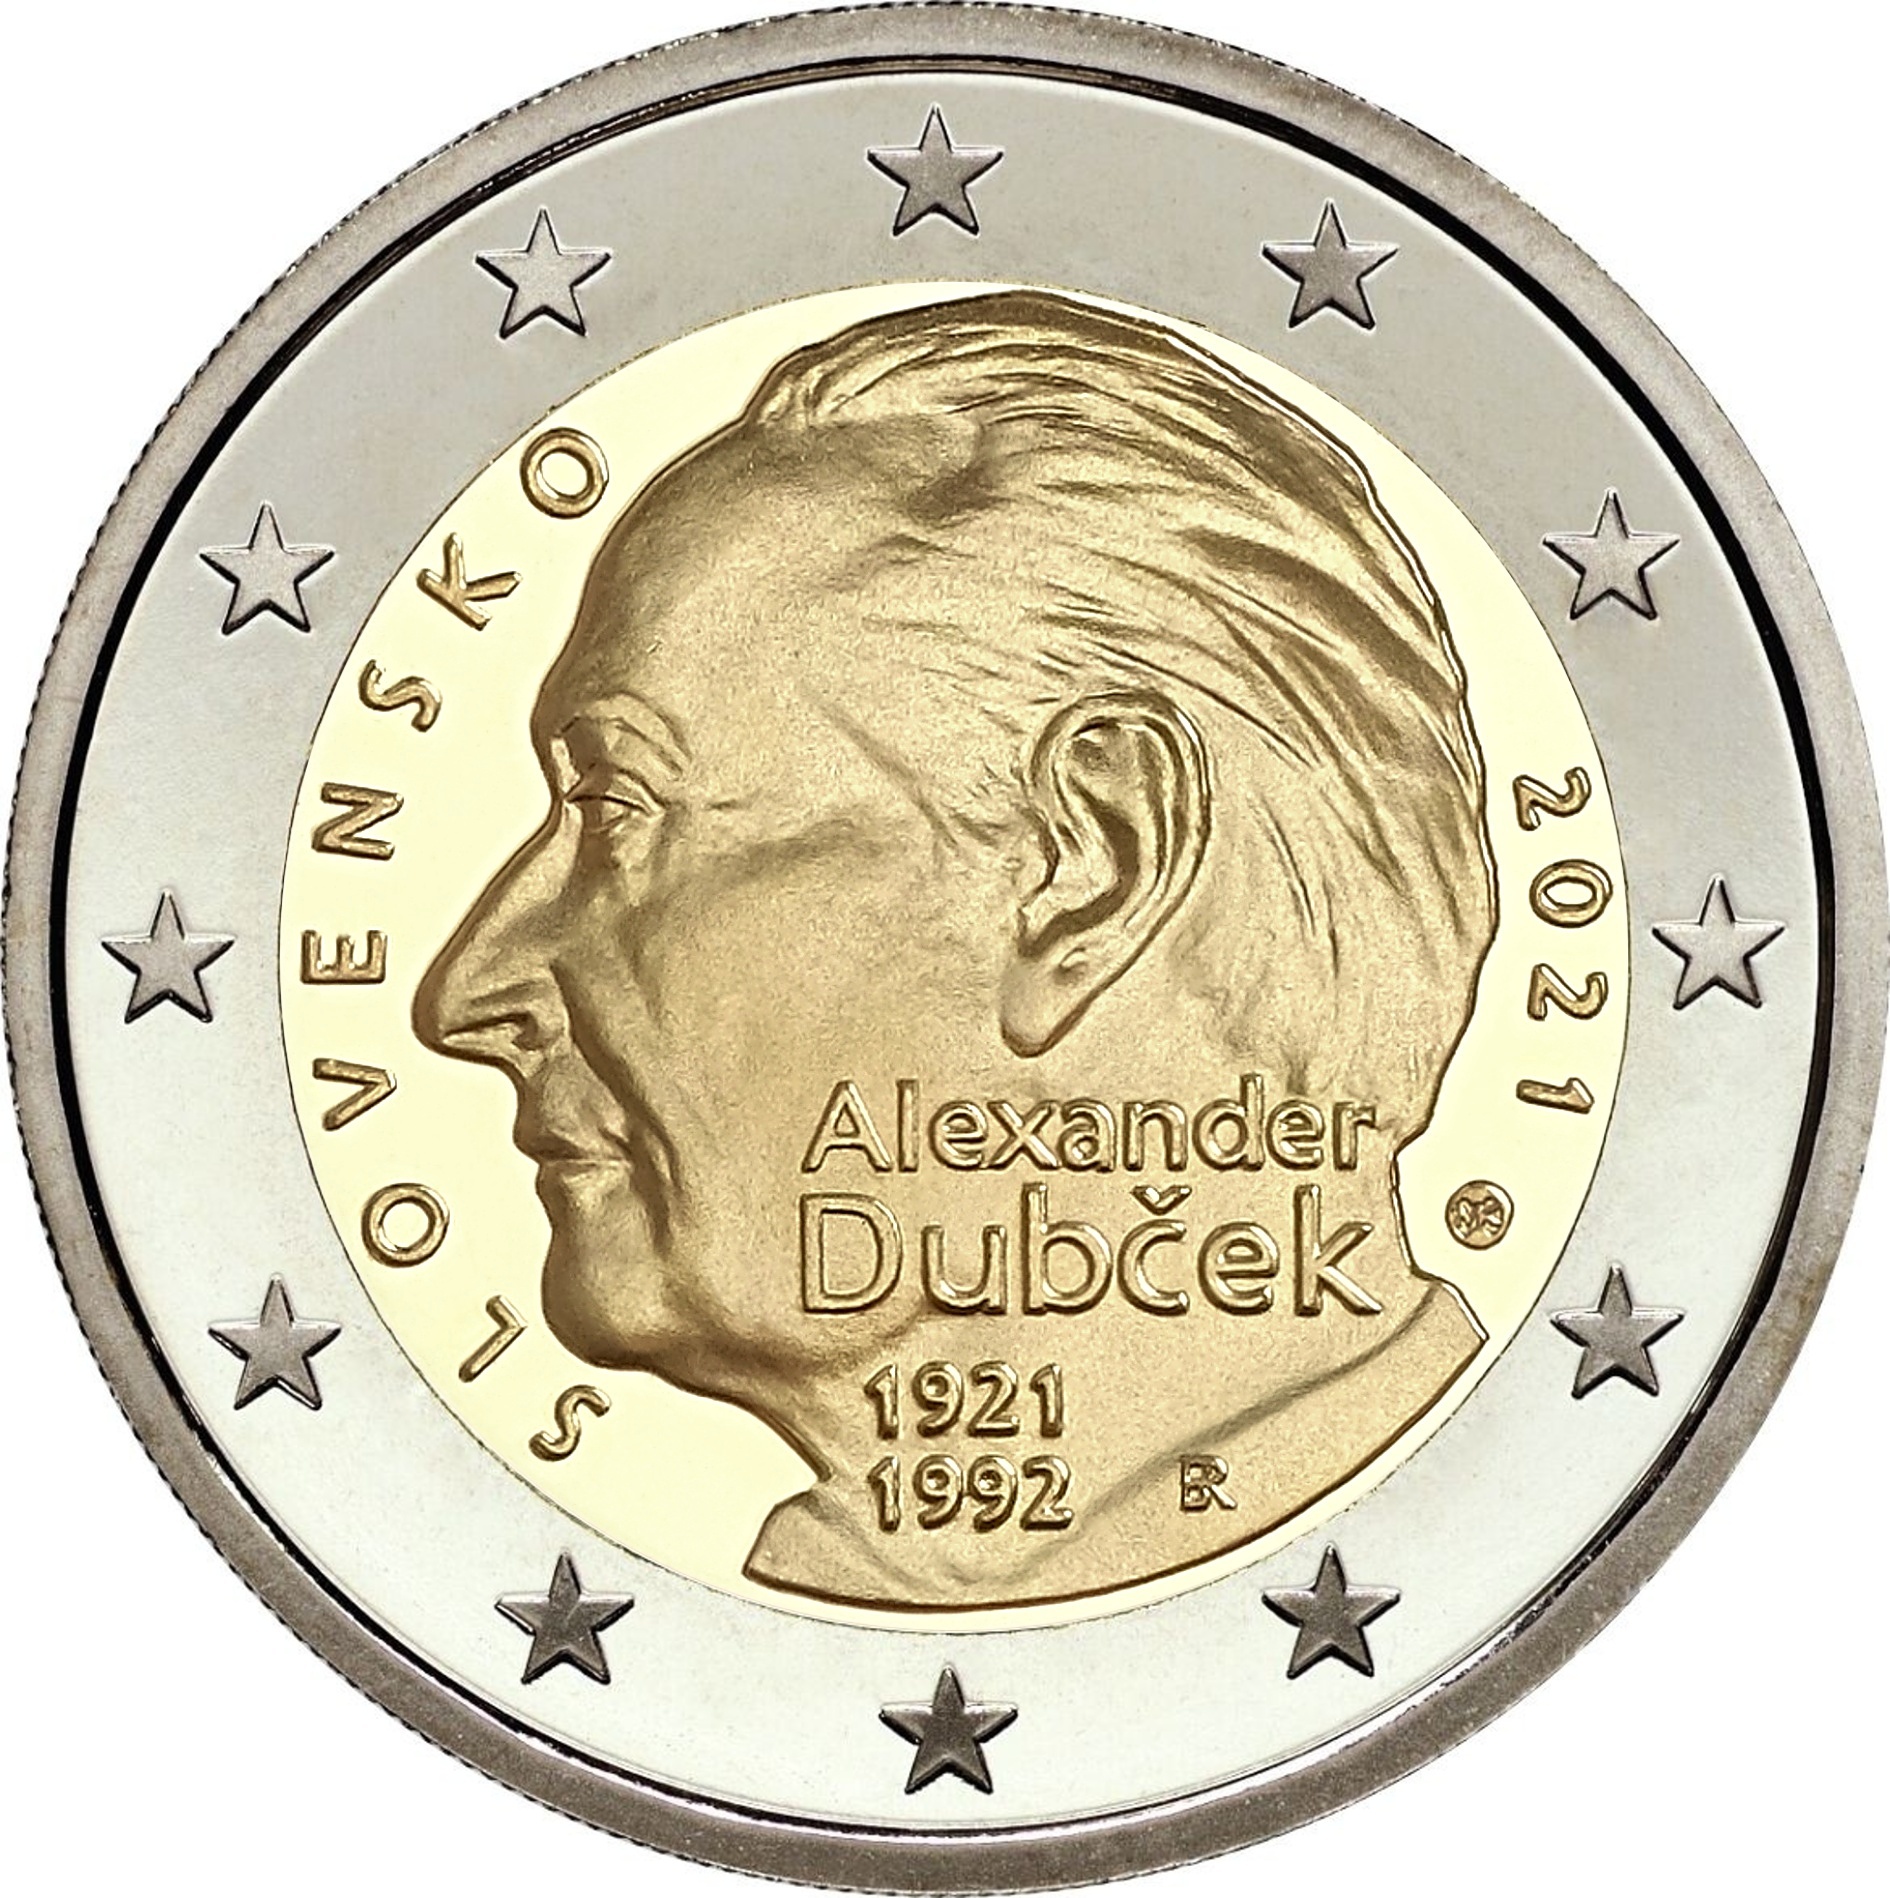 Banknotes and coins, 100th anniversary of the birth of Alexander Dubček